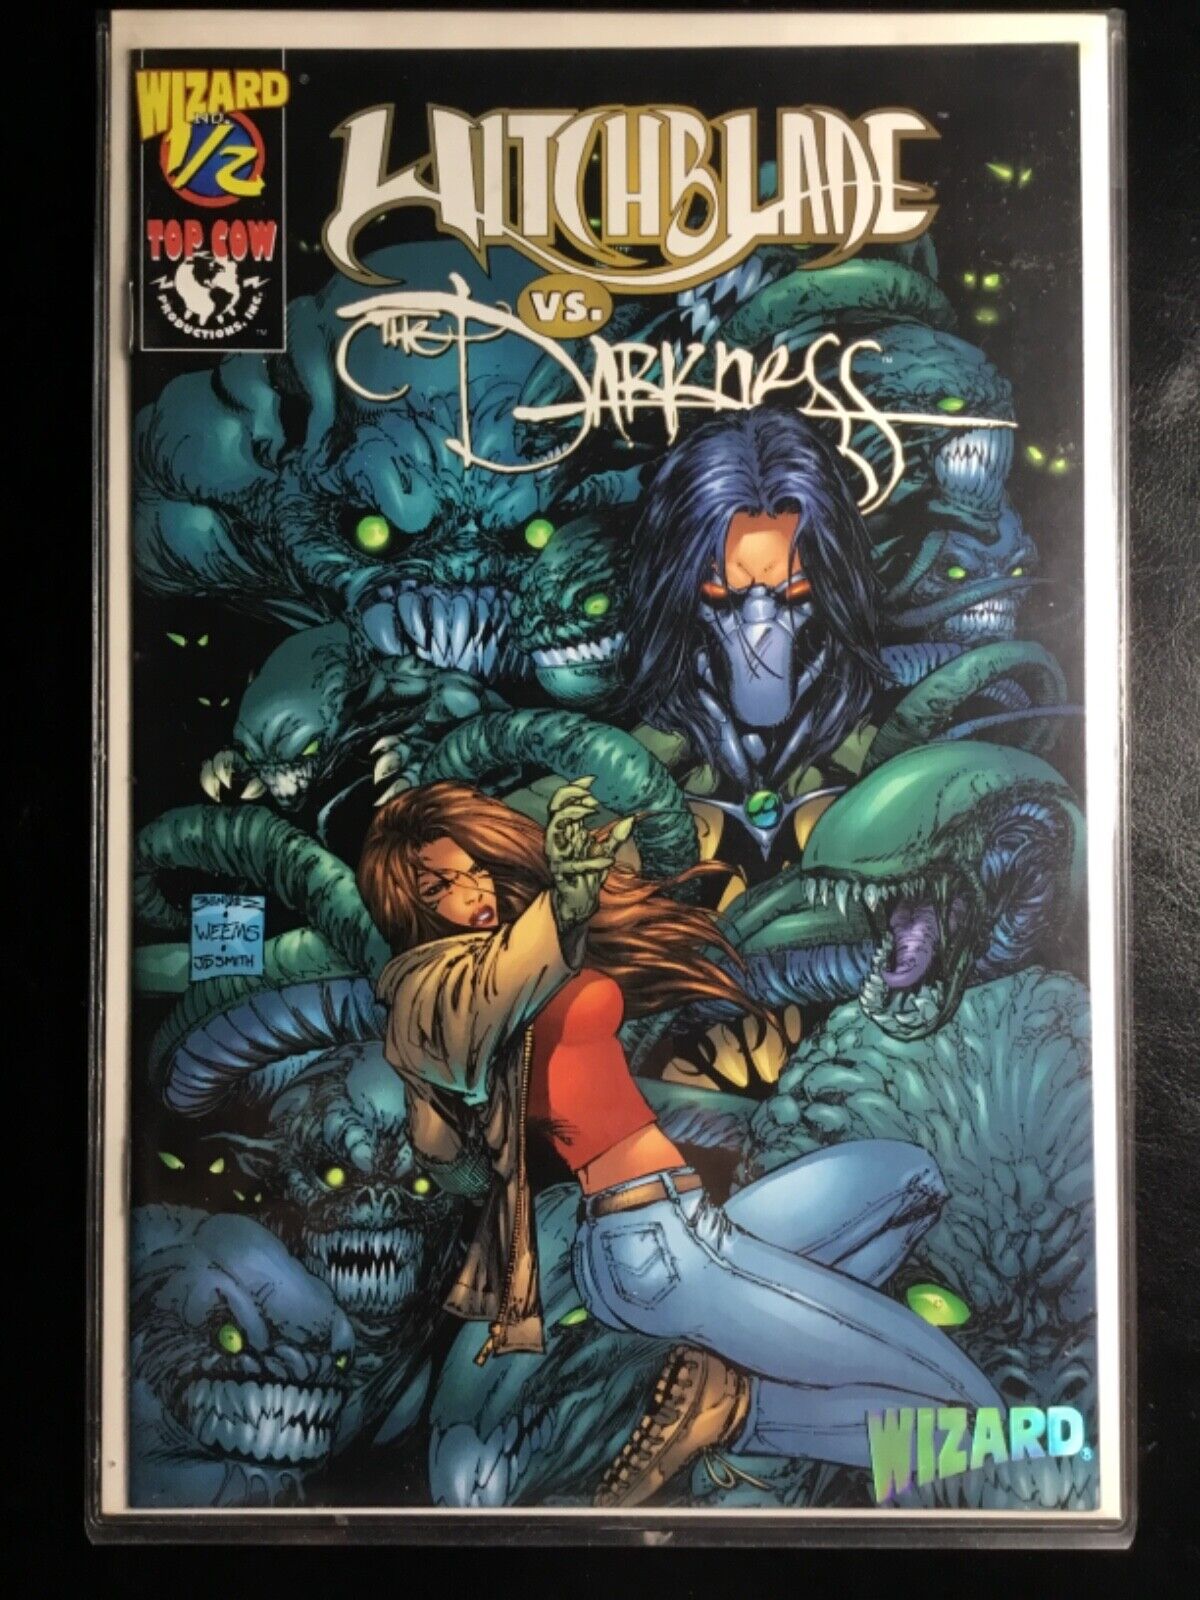 WITCHBLADE VS. THE DARKNESS 1997 WIZARD 1/2 VF- 7.5 SPECIAL PROMOTIONAL GIVEAWAY